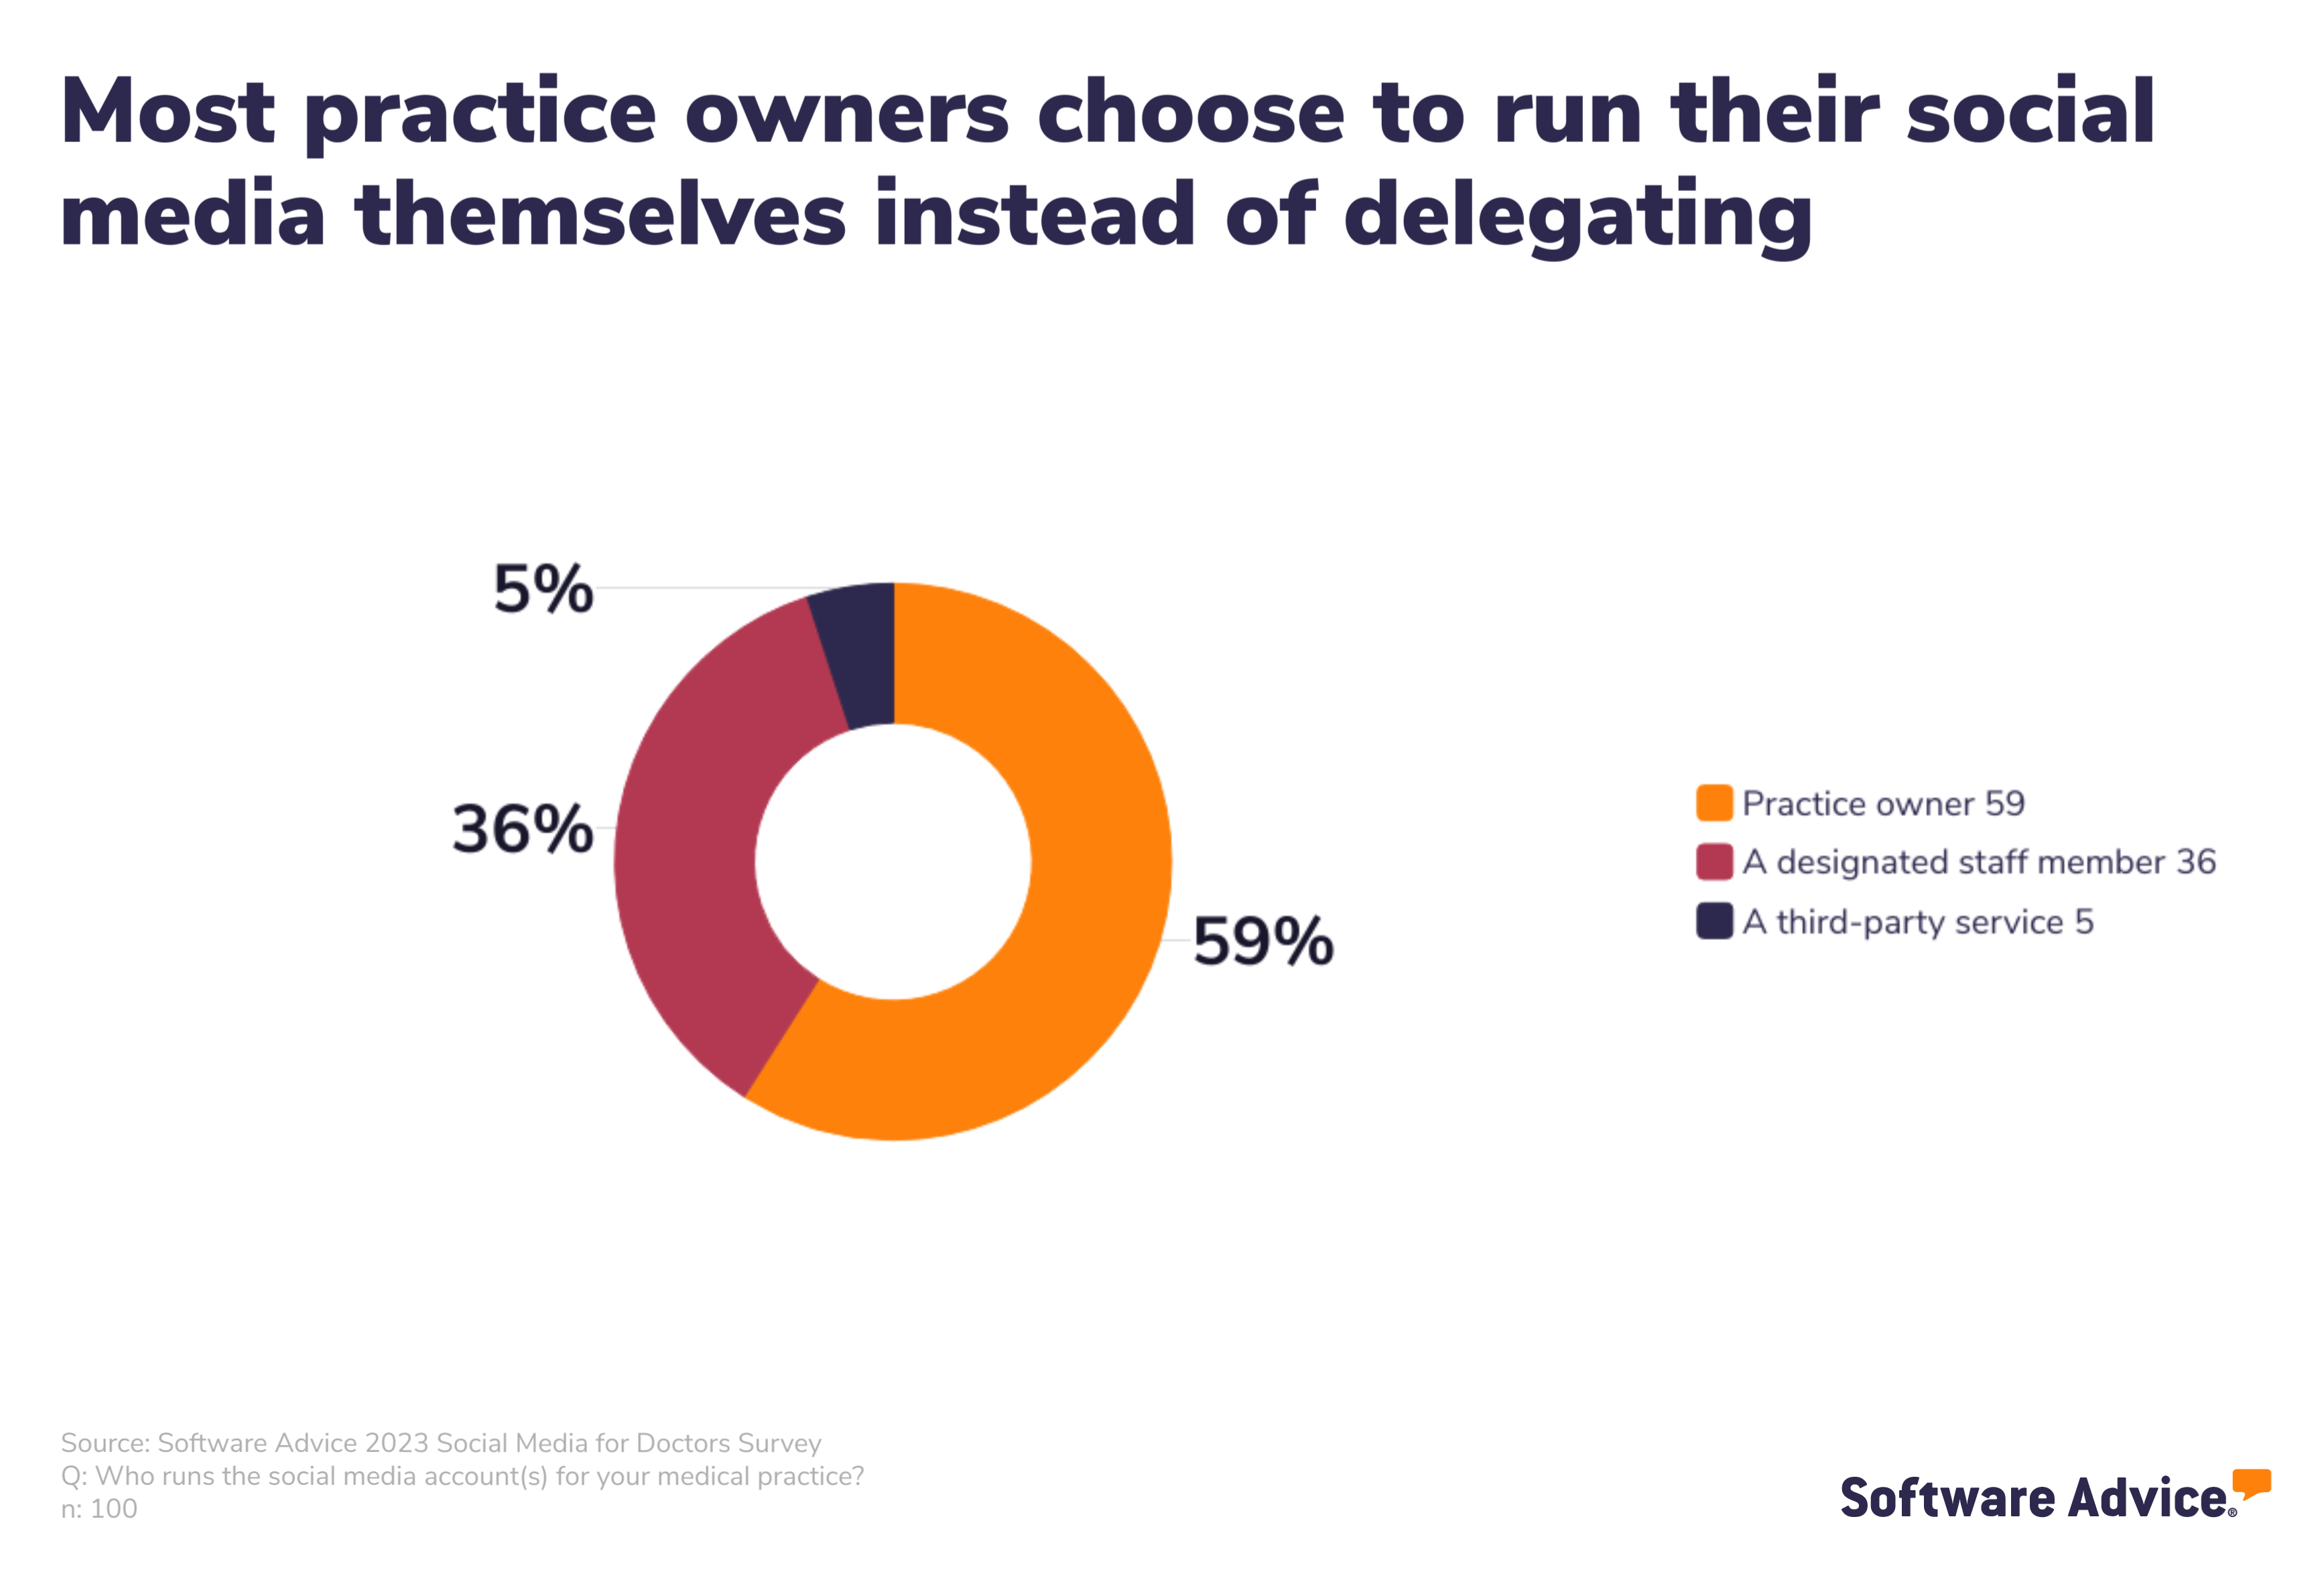 Most practice owners choose to run their social media themselves instead of delegating